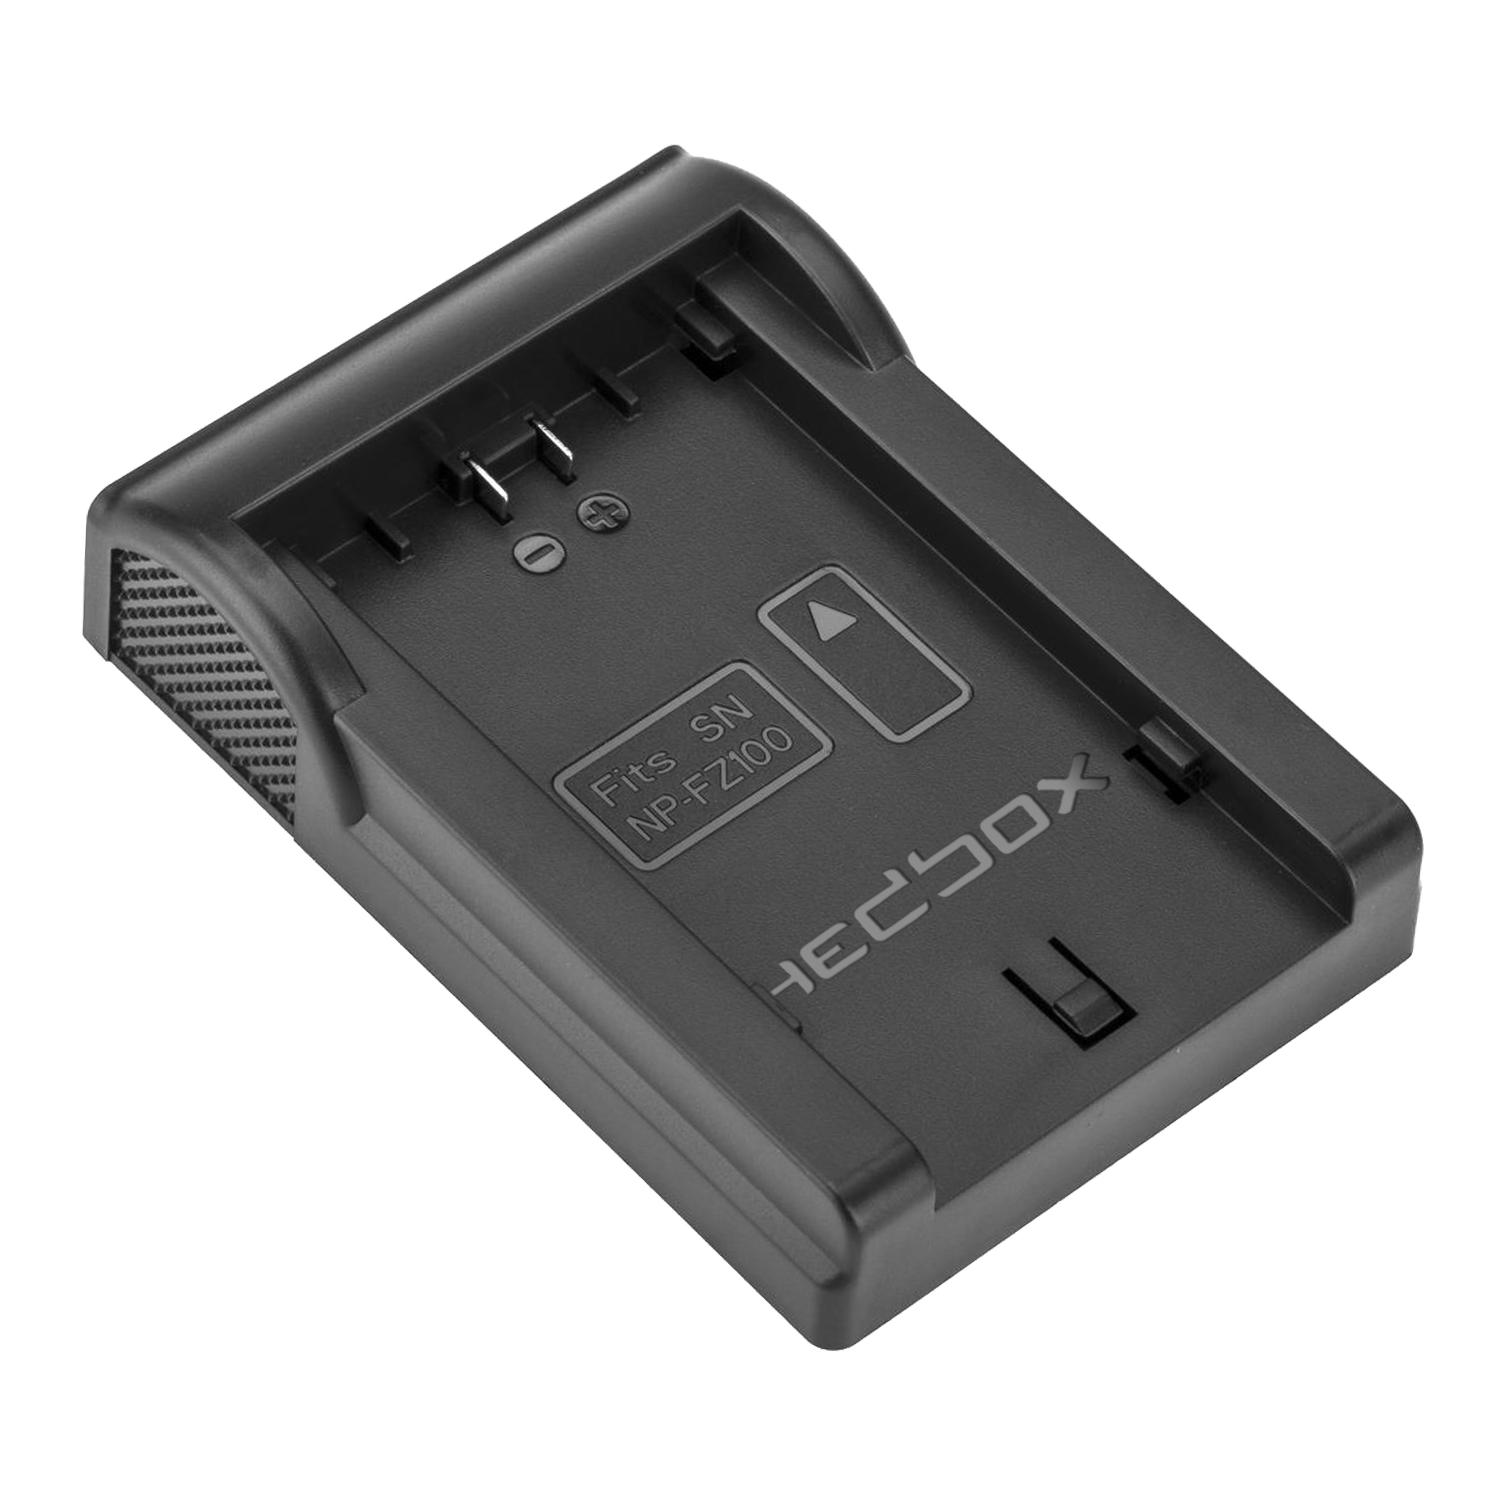 RP-DFZ100 - Battery Charger Plate